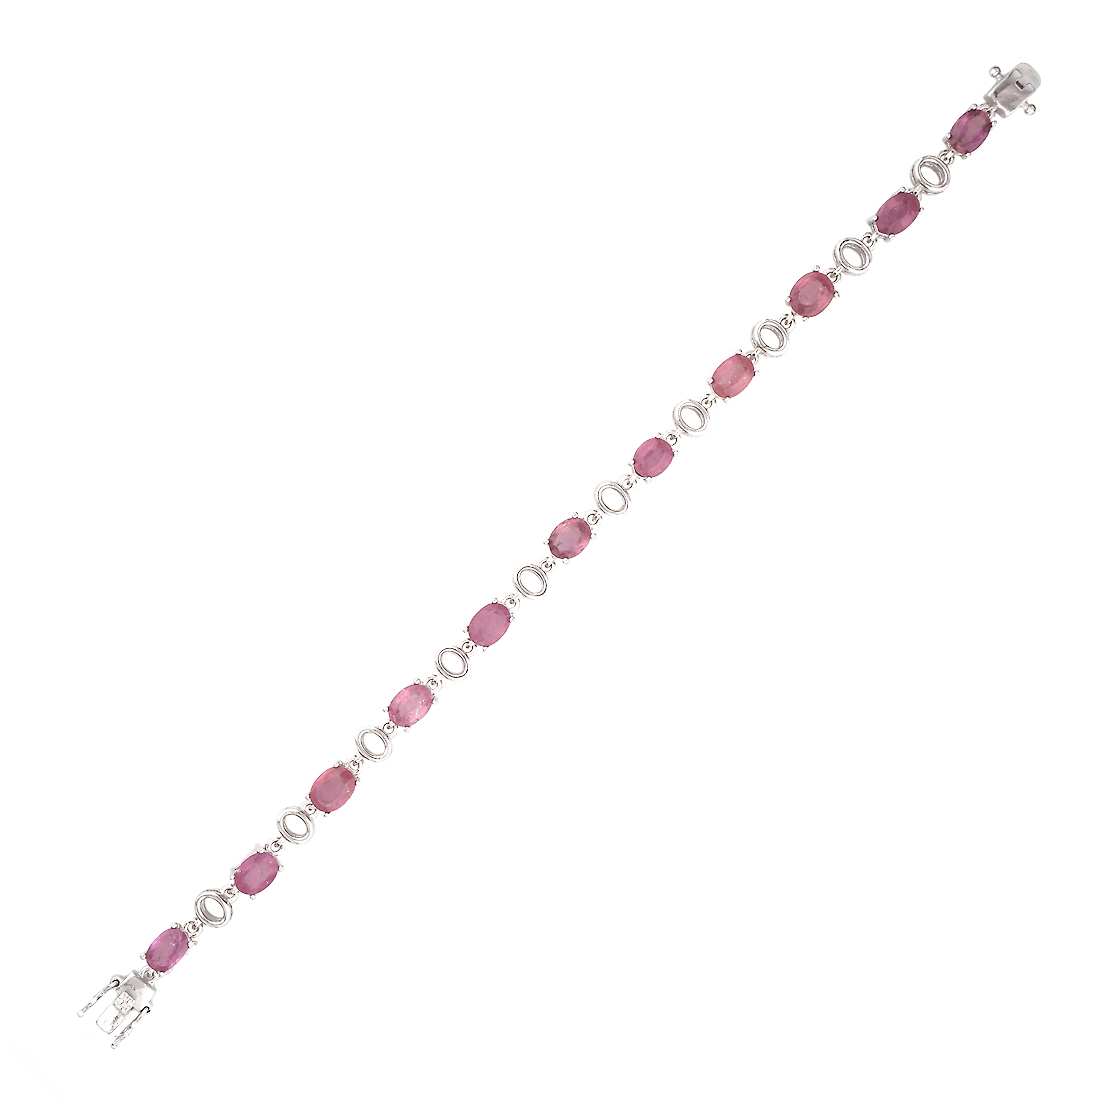 Ruby Bracelet with Rhodium Plating 7.25 in